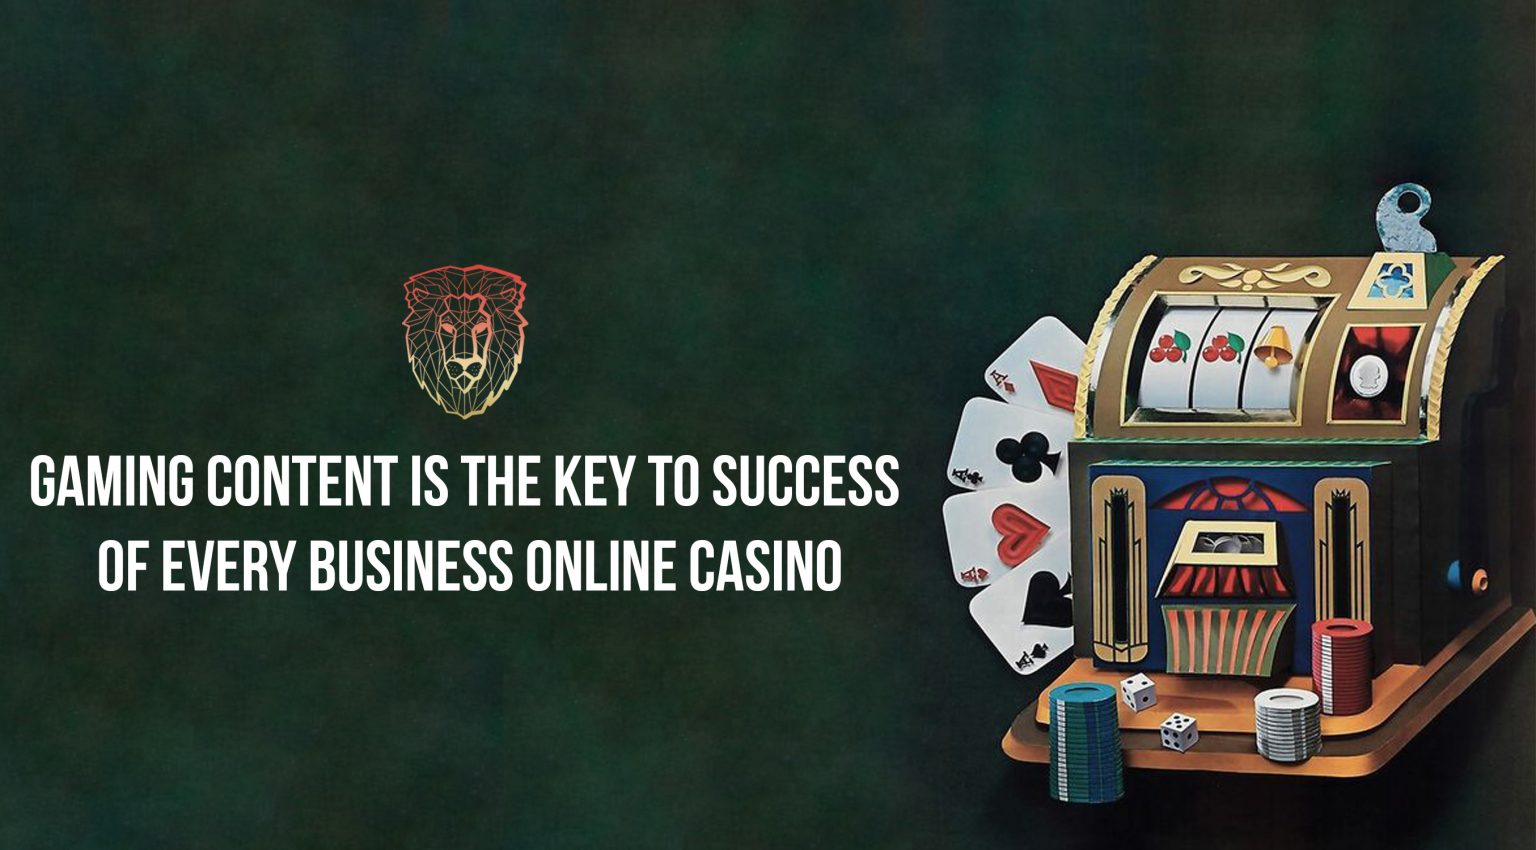 gambling content for android casinos, cryptocurrency payment systems, business online casino